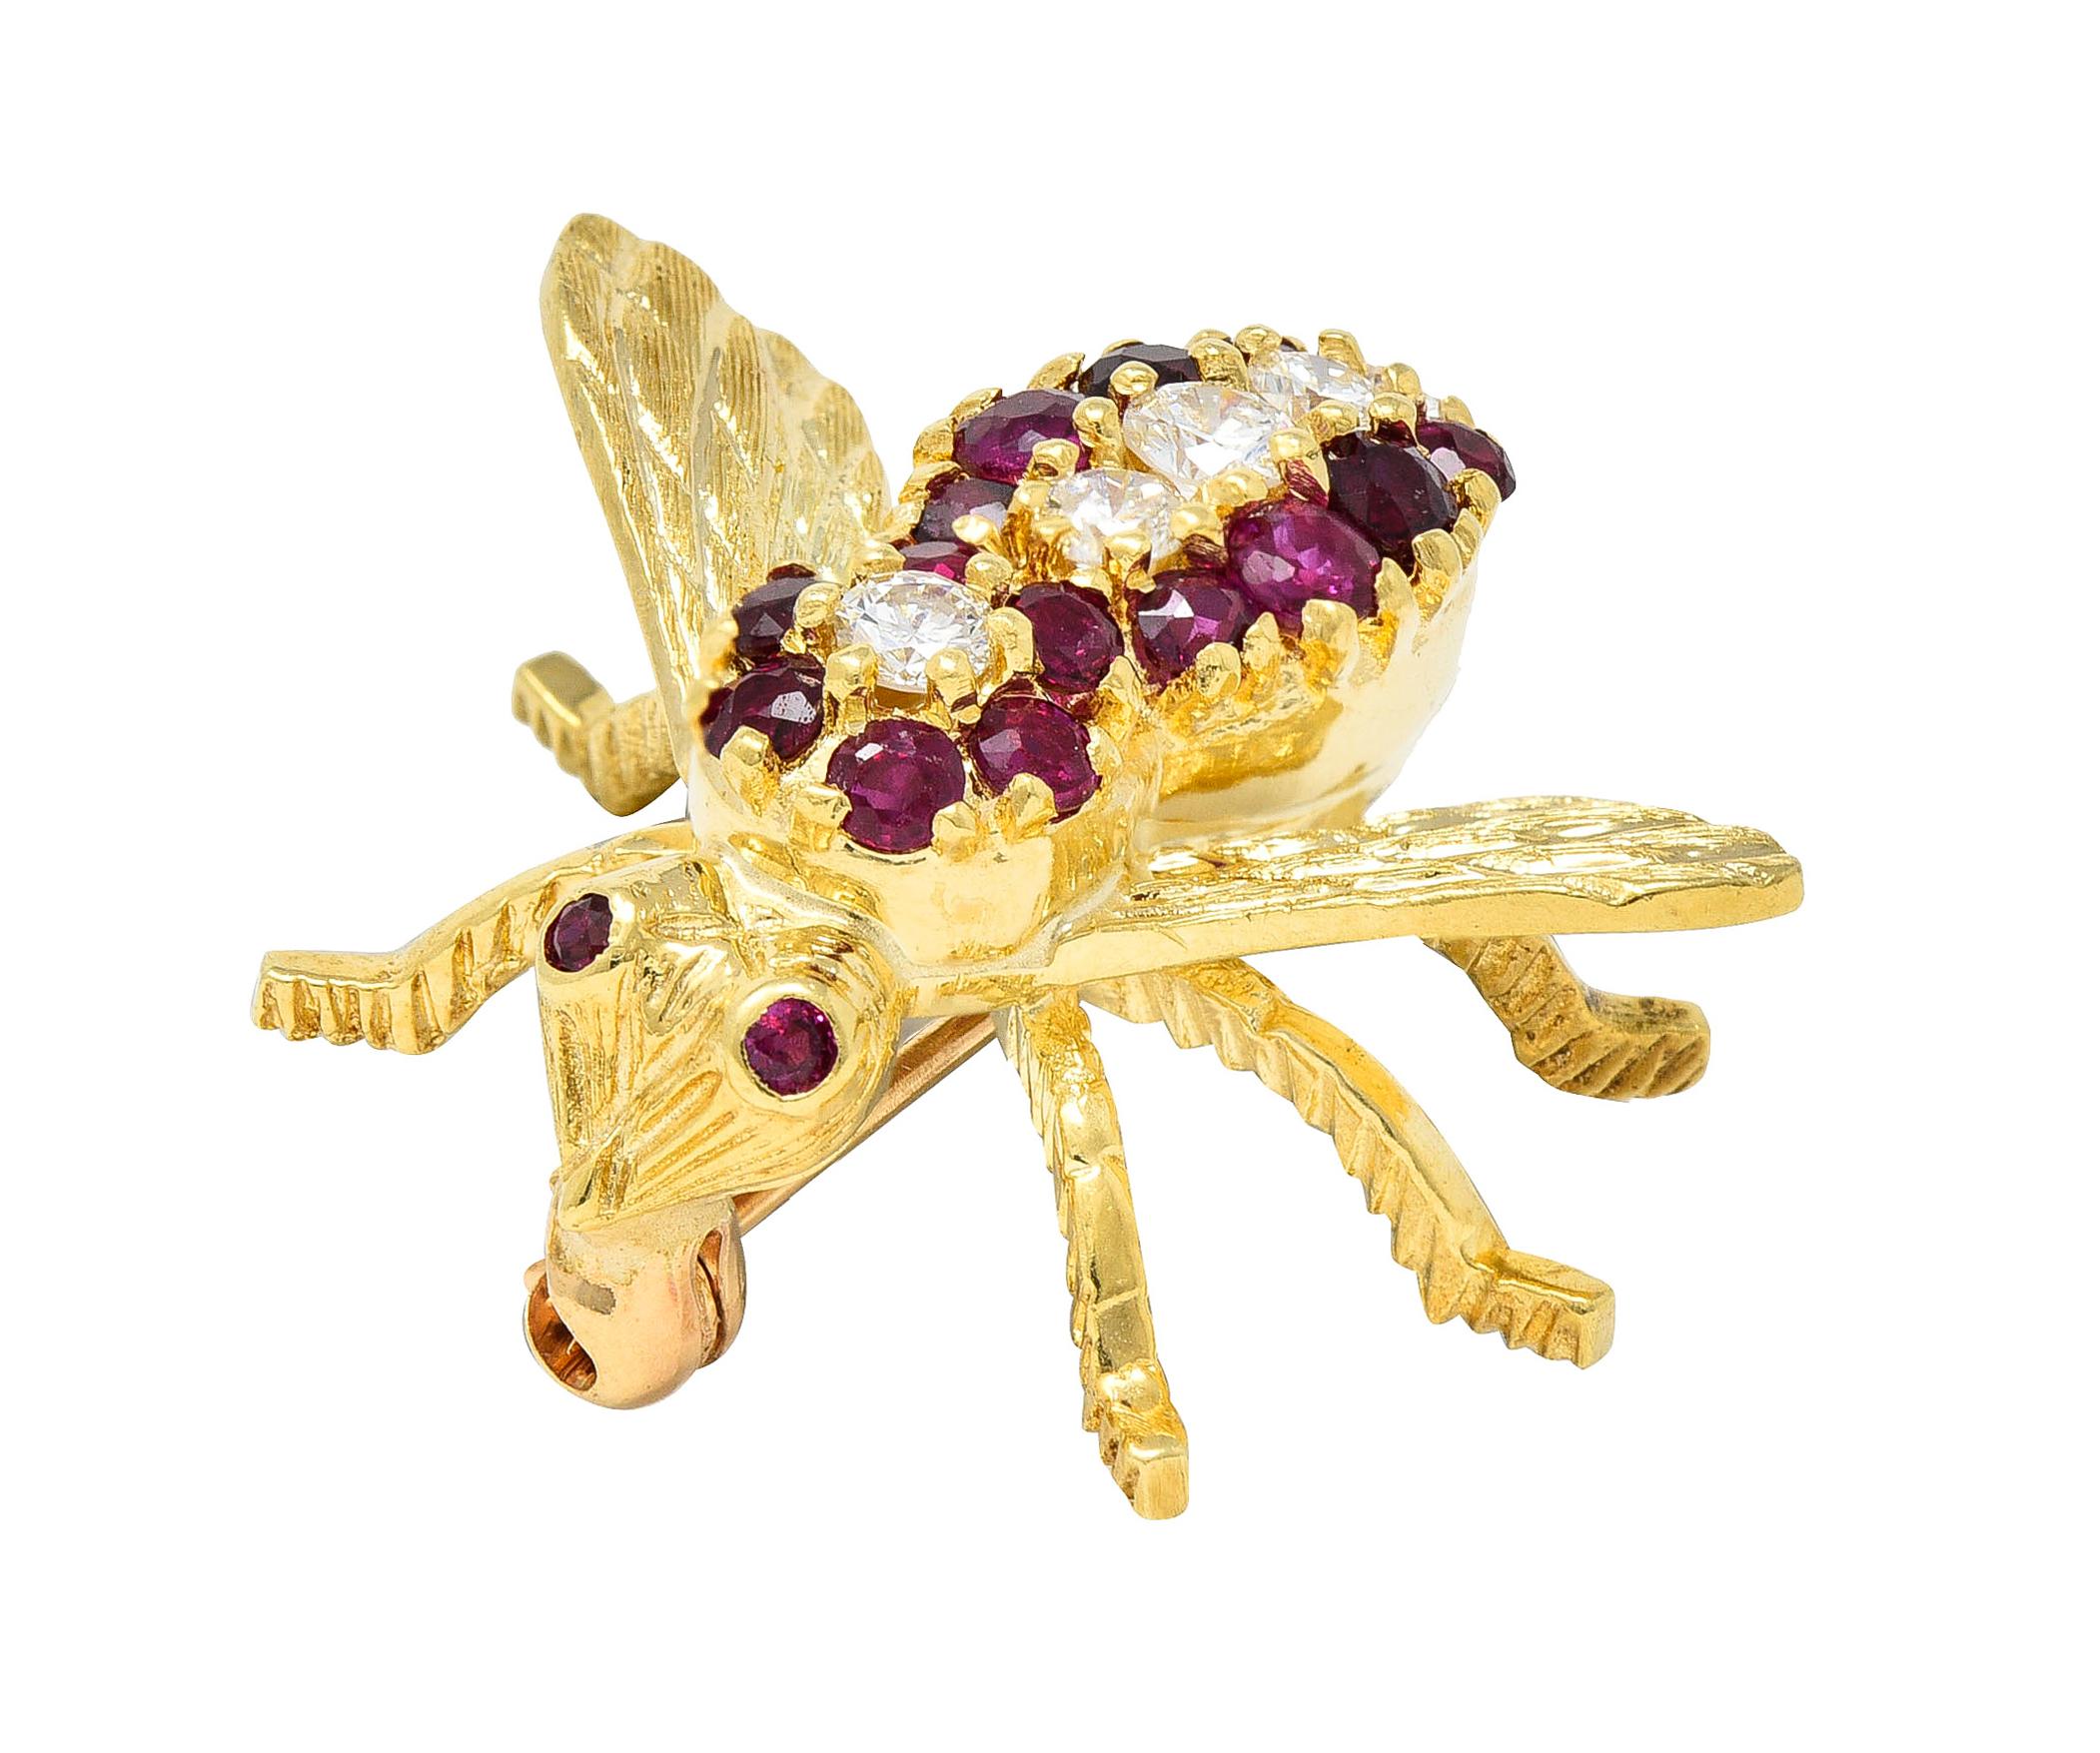 Designed as a stylized bee with linear engraved wings and textured legs
Featuring transitional cut diamonds prong set in a row along the back
Weighing approximately 0.26 carat total - G/H color with VS clarity
Flanked by two rows of round cut rubies